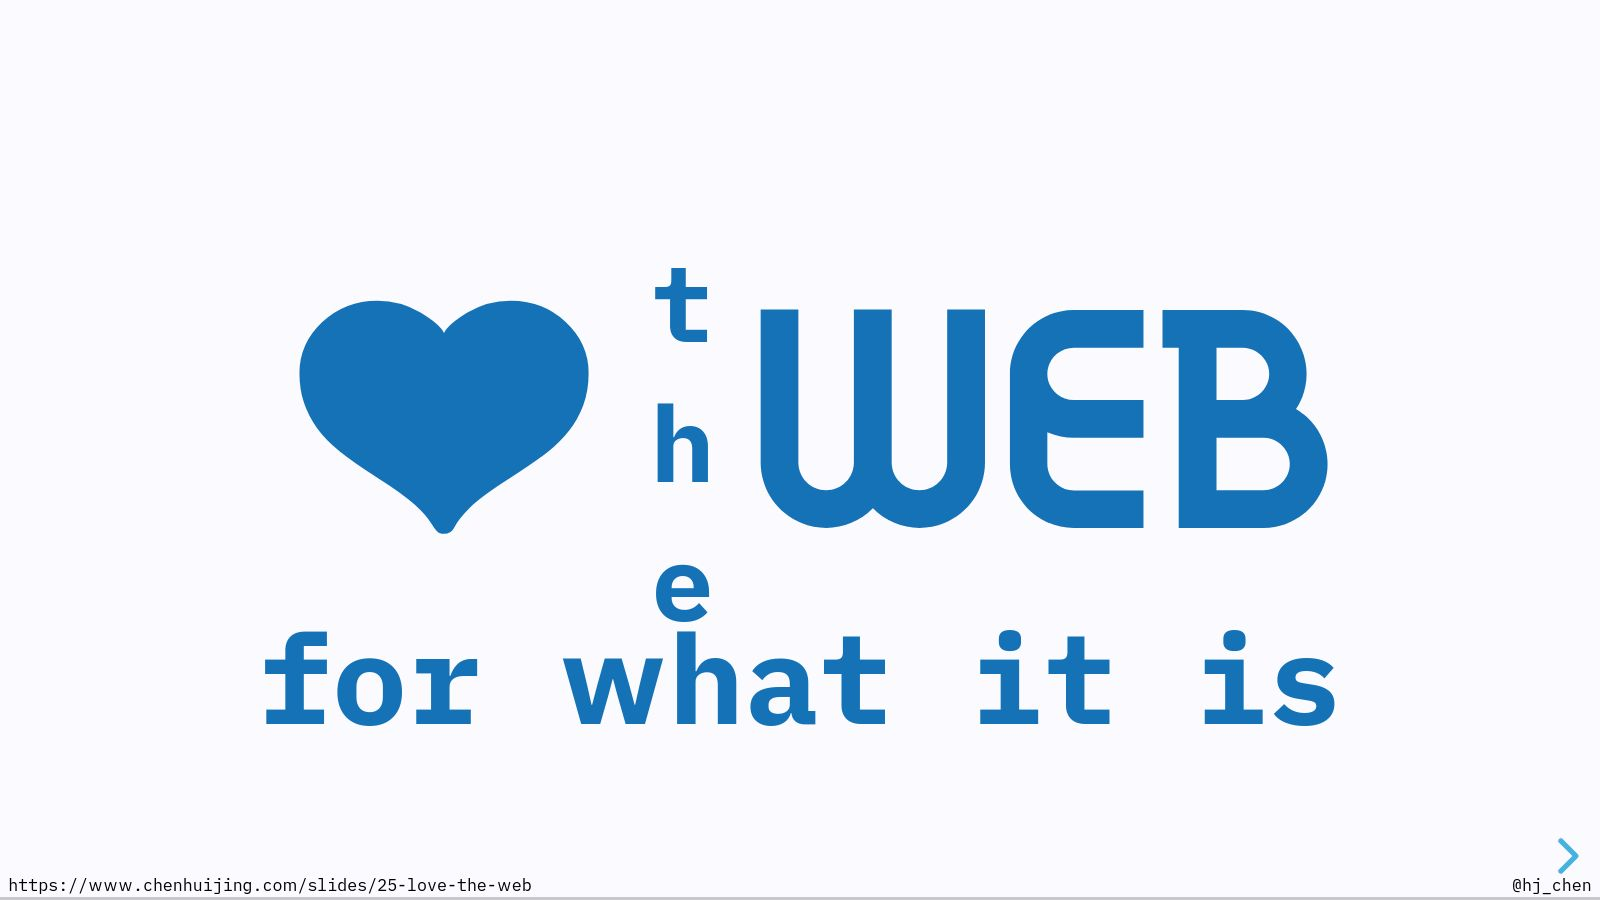 Love the web for what it is